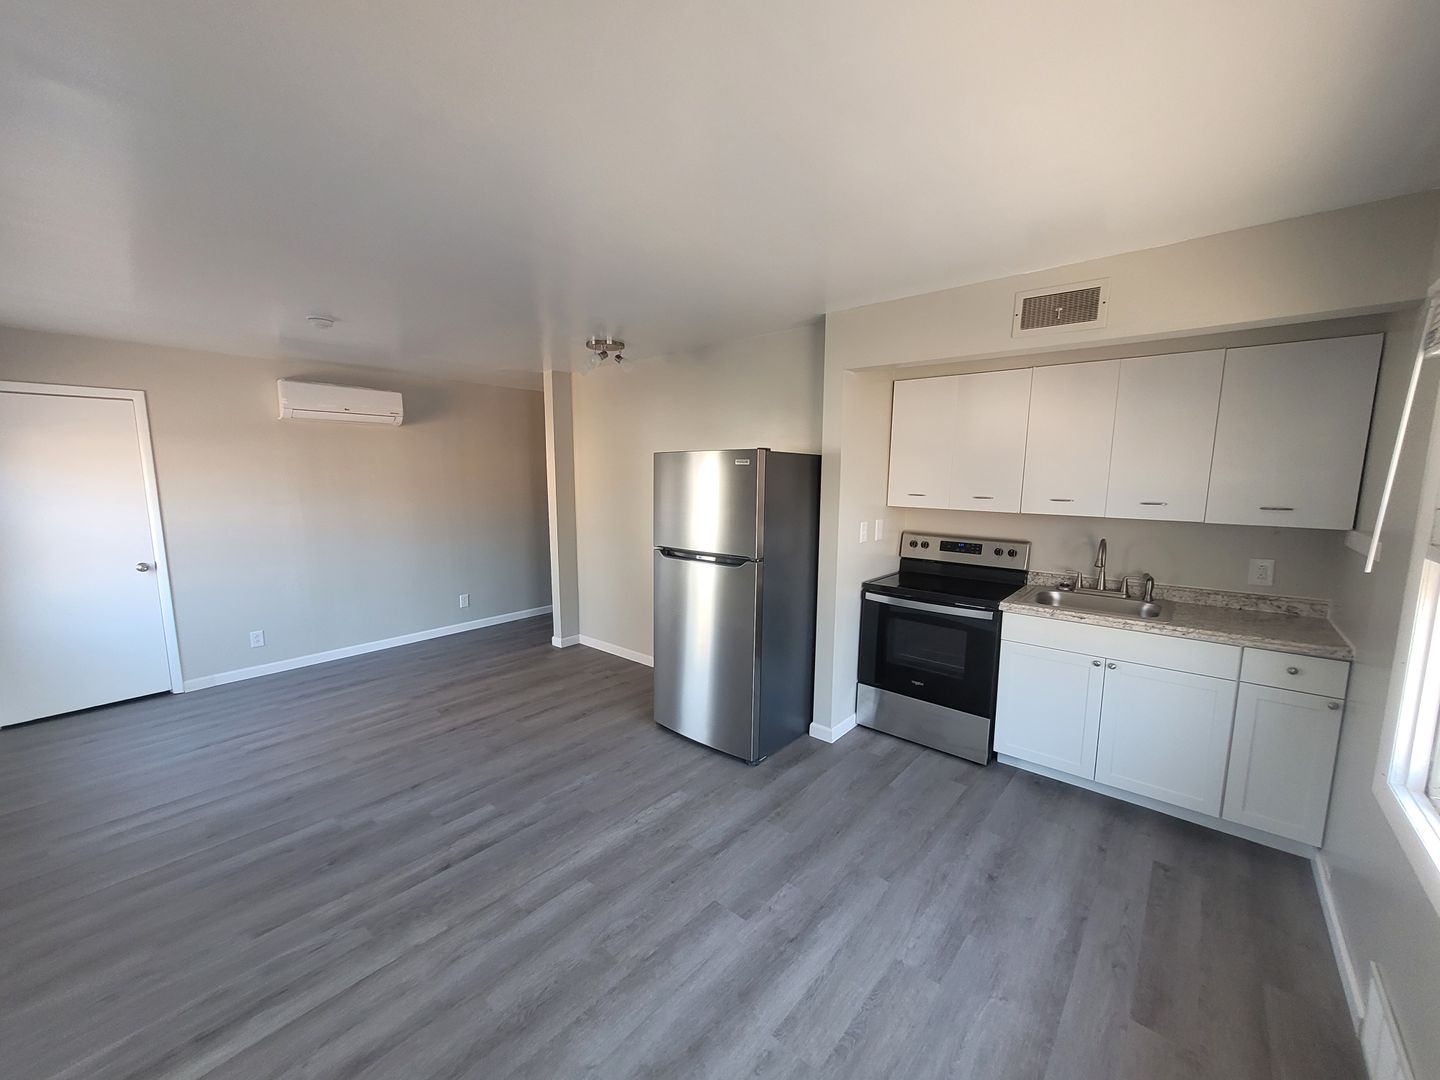 $495 - STUDIO - Newly remodeled multi-family home